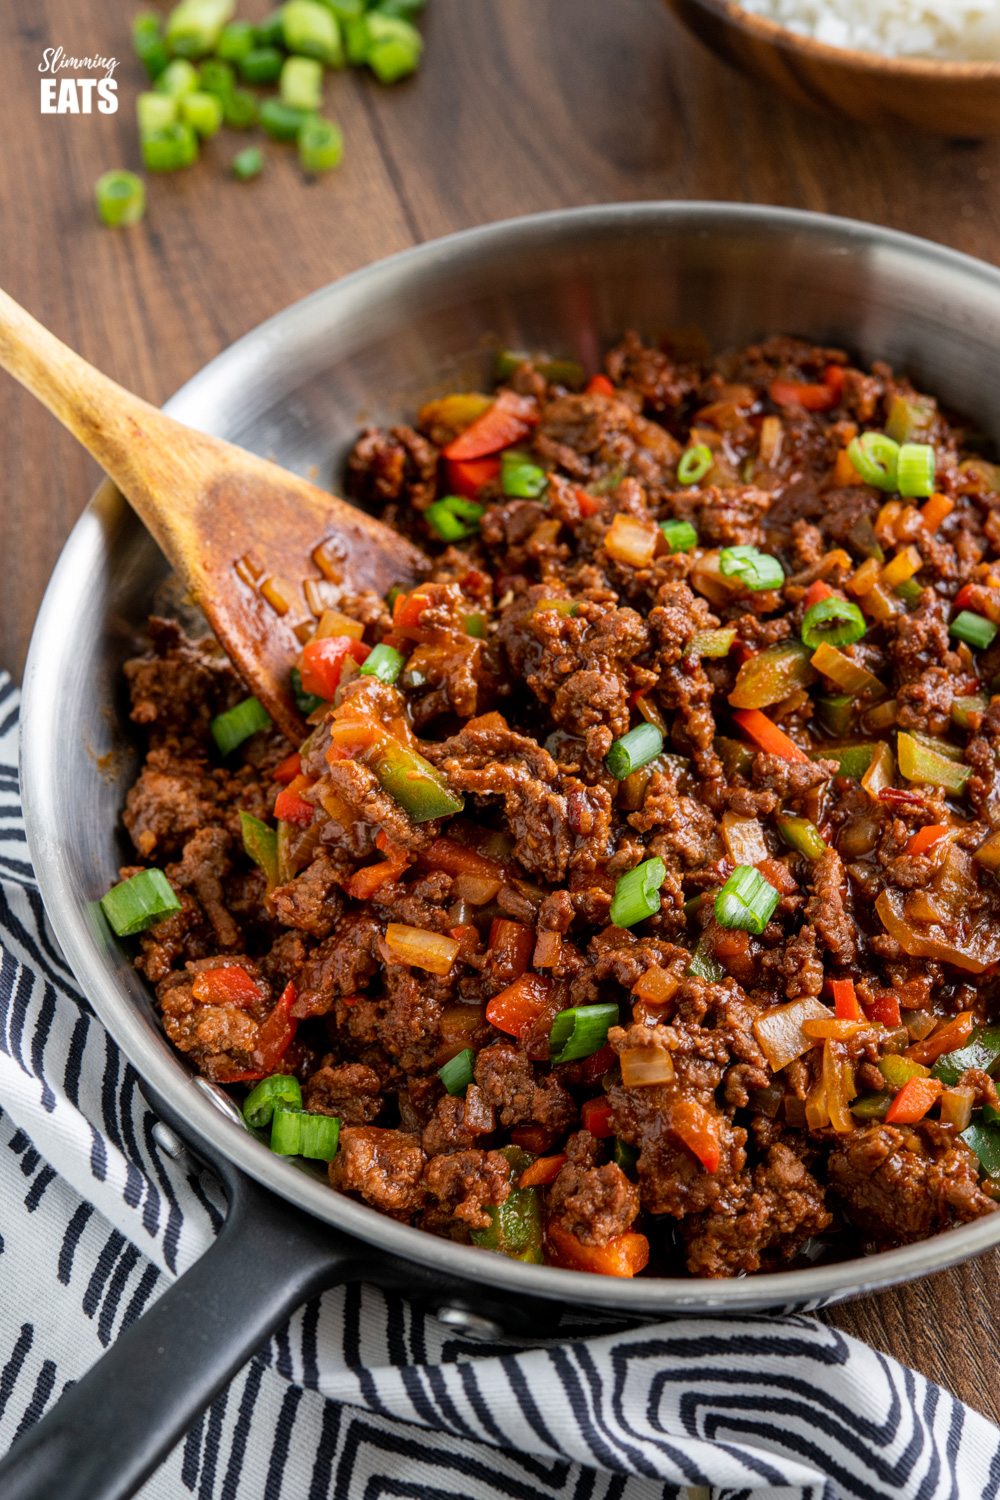 Easy Asian Ground Beef Bowl | Slimming Eats Recipes